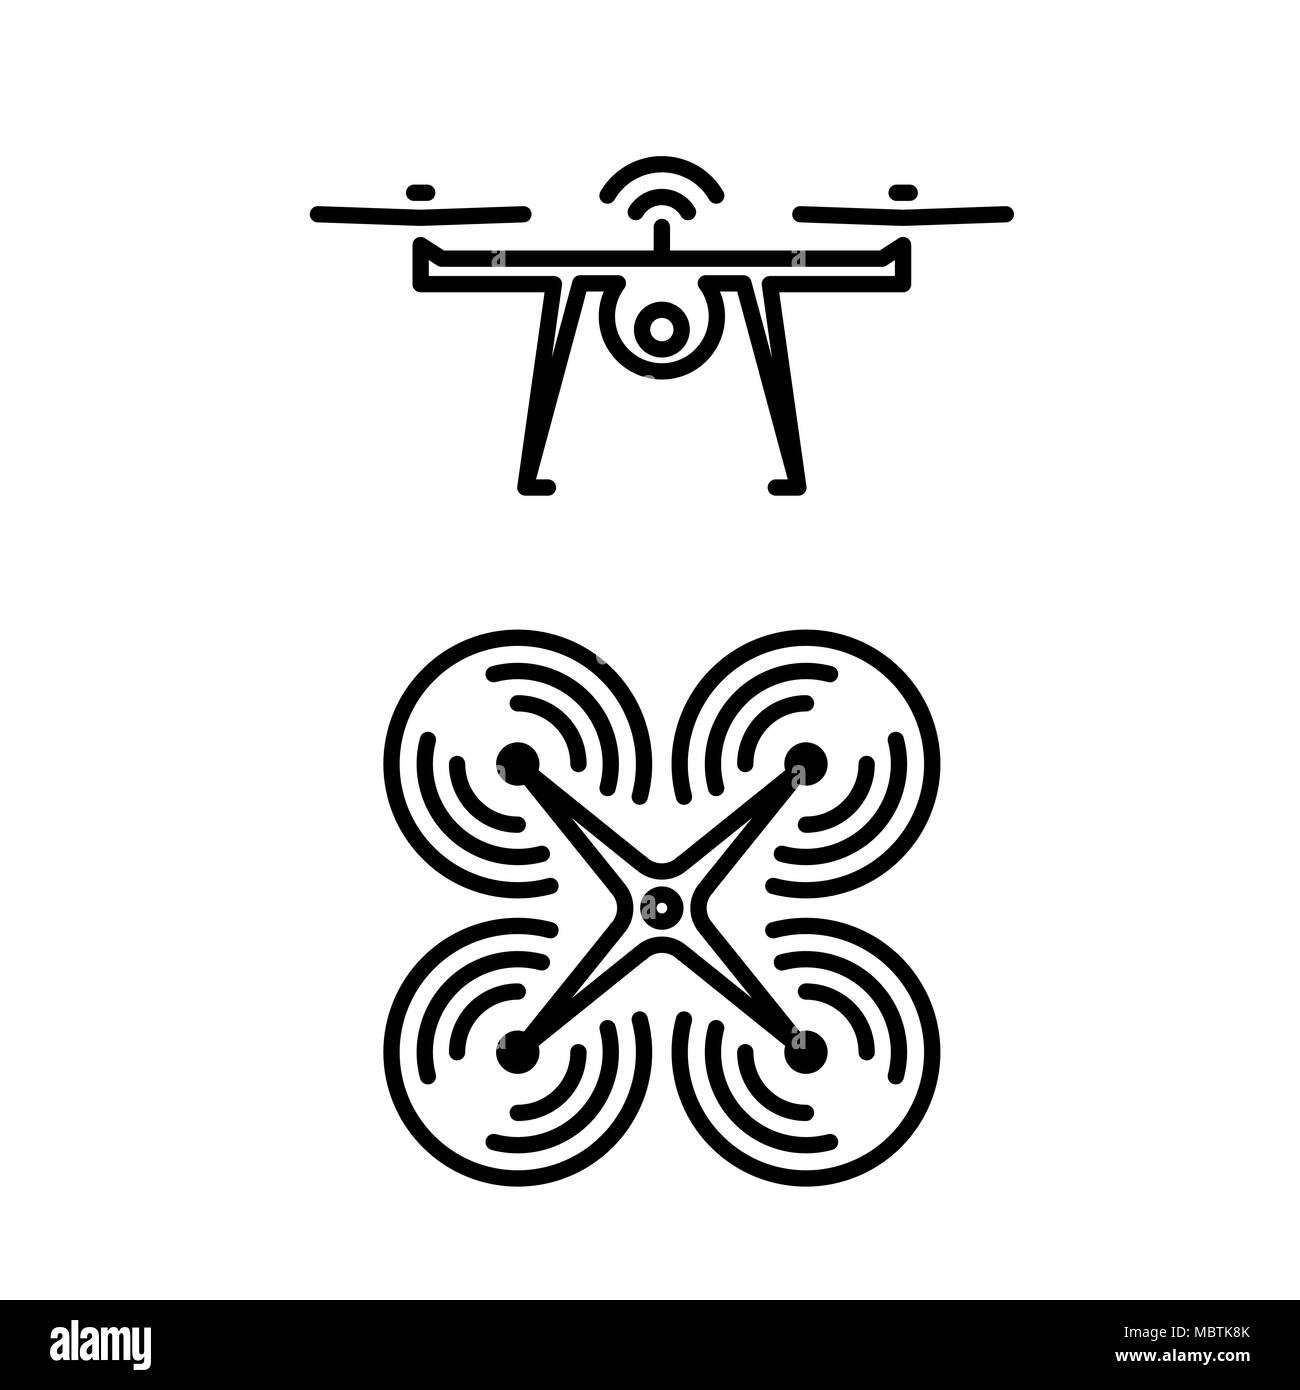 Air drone icon simple flat vector illustration. Stock Vector